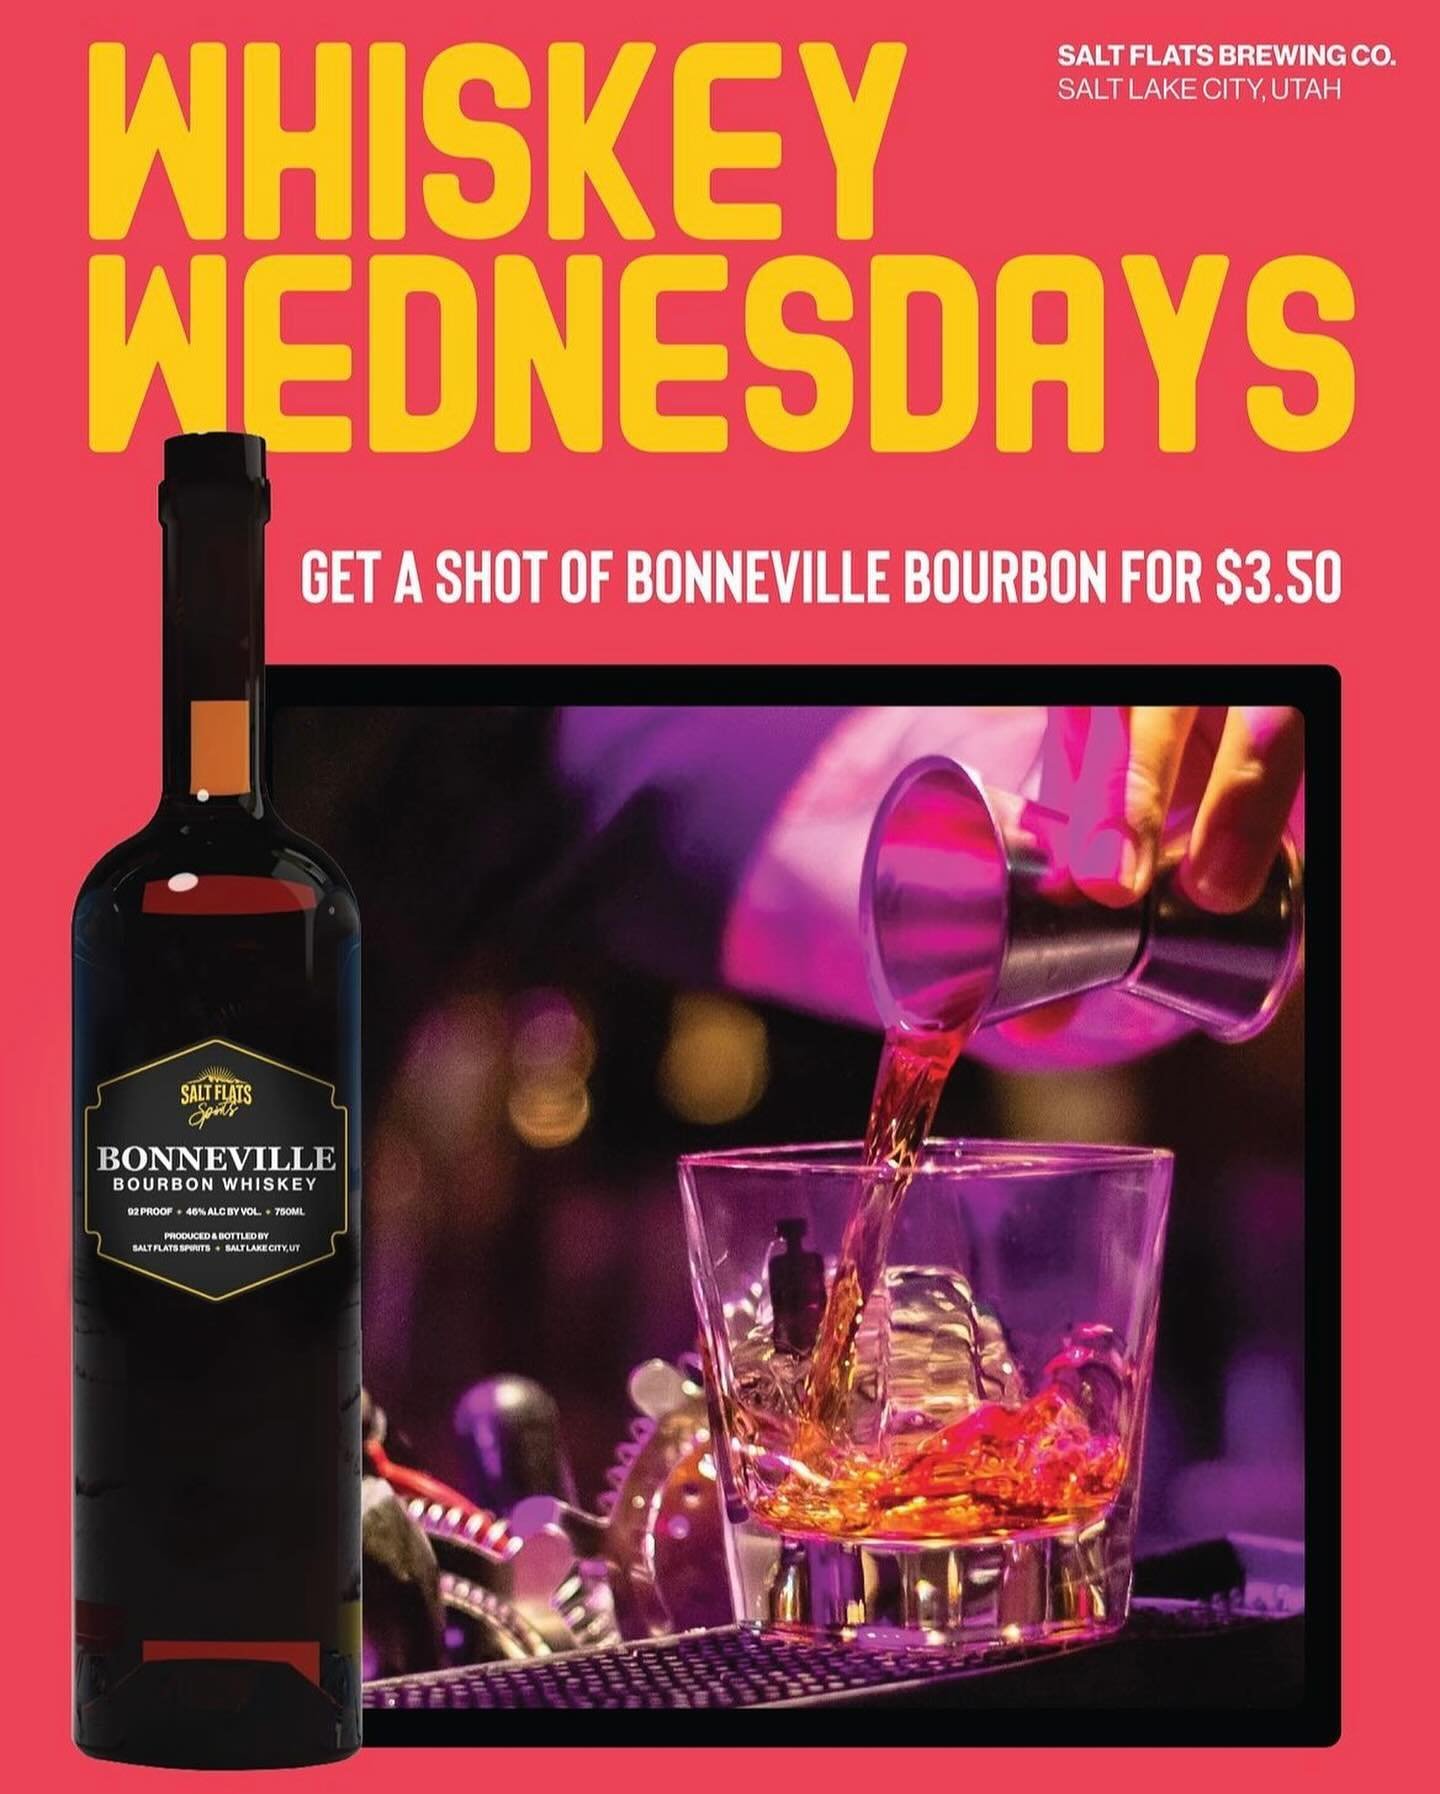 Whiskey Wednesdays🥃 come in and get a shot of our award winning Bonneville Bourbon for only $3.50 
.
.
.
.
.
#whiskeywednesdays #bonneville #bourbon 
#saltflatsspirits #gold #wednesdays #winner #saltflatsbrewingcompany #usaratings #usaspiritsratings